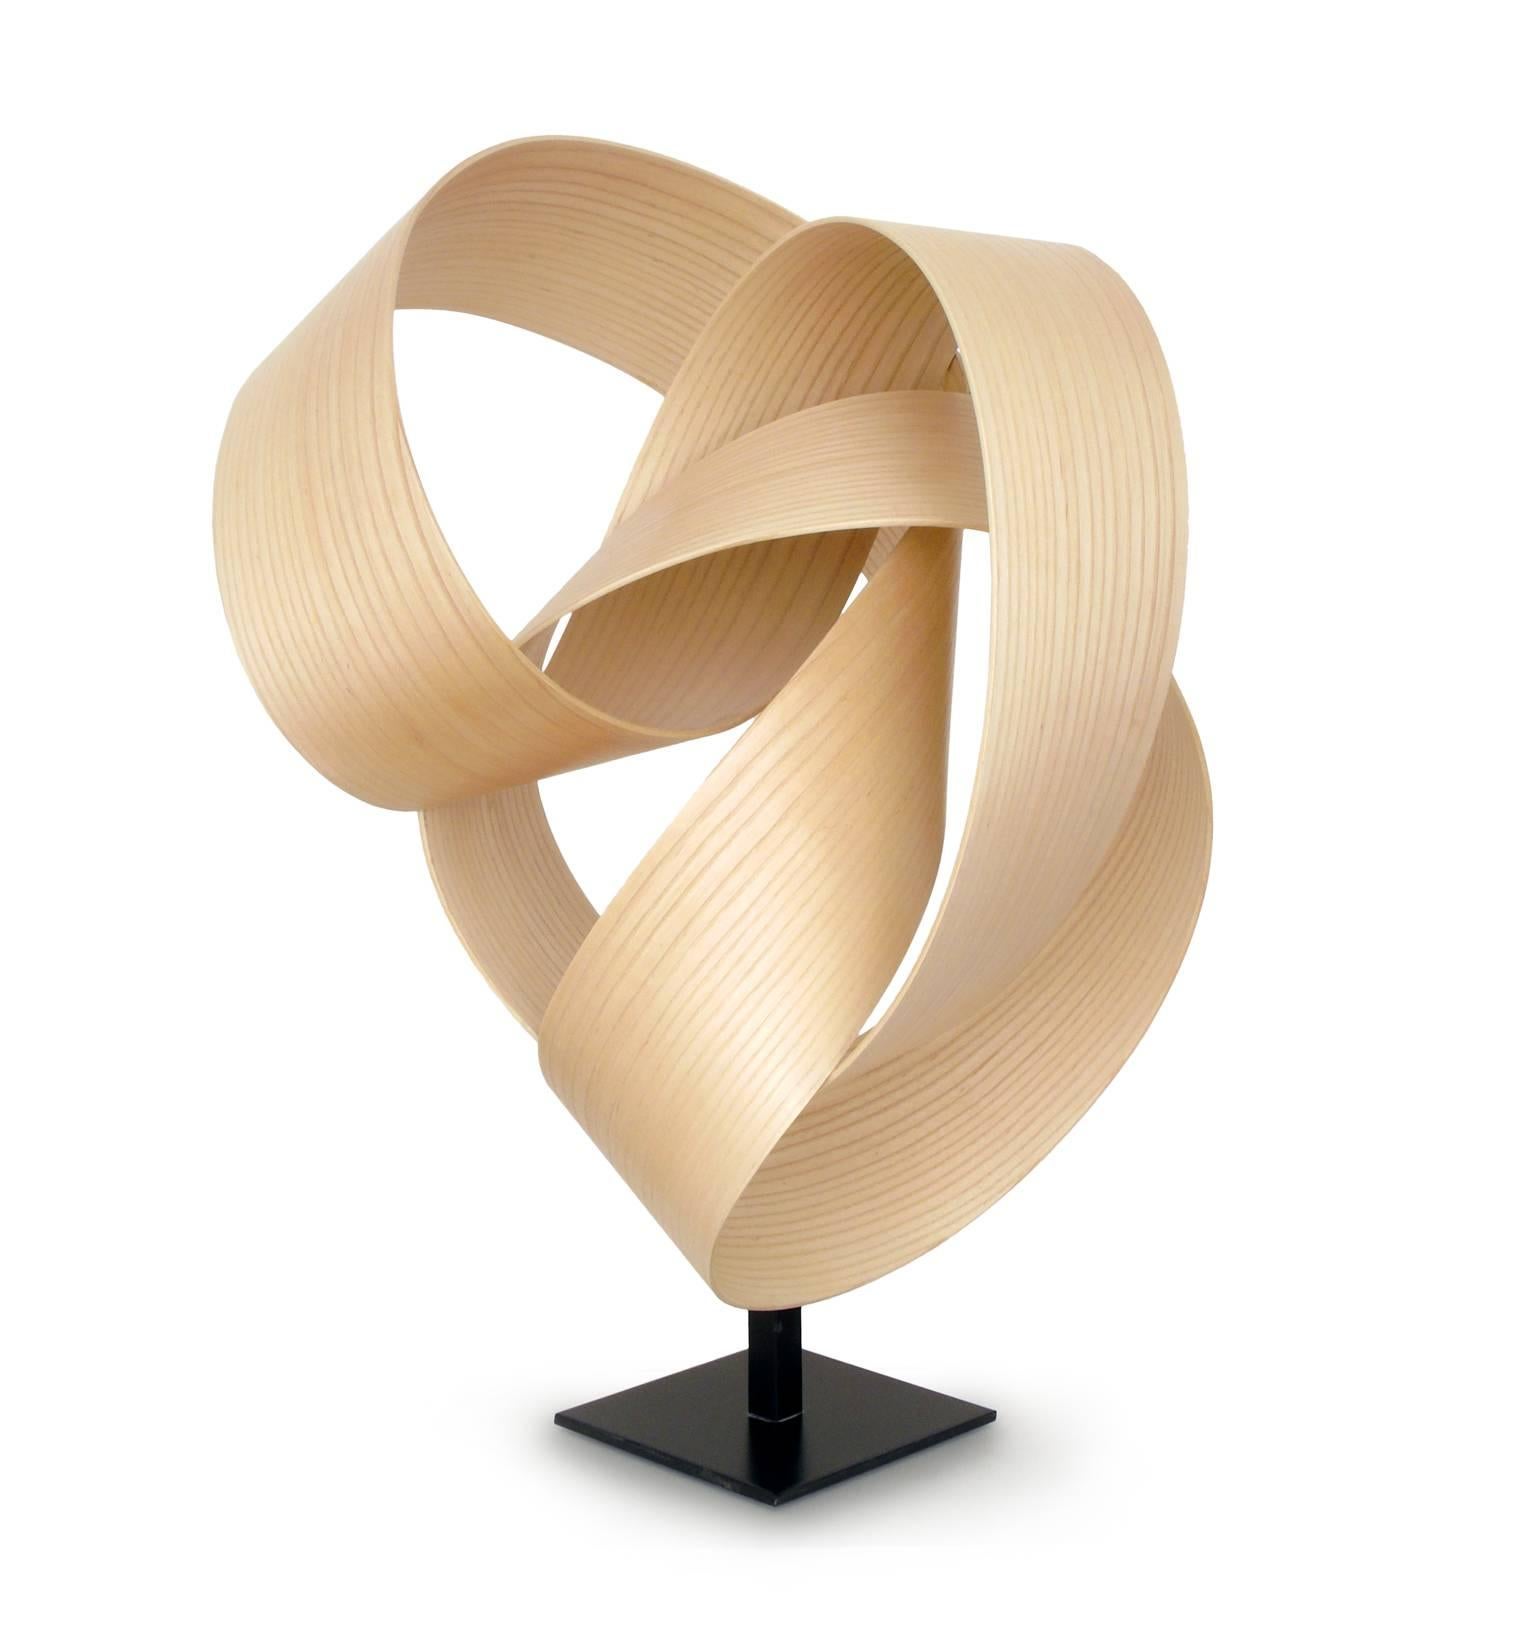 Atmosphere #205 (wood ribbon sculpture) - Sculpture by Jeremy Holmes